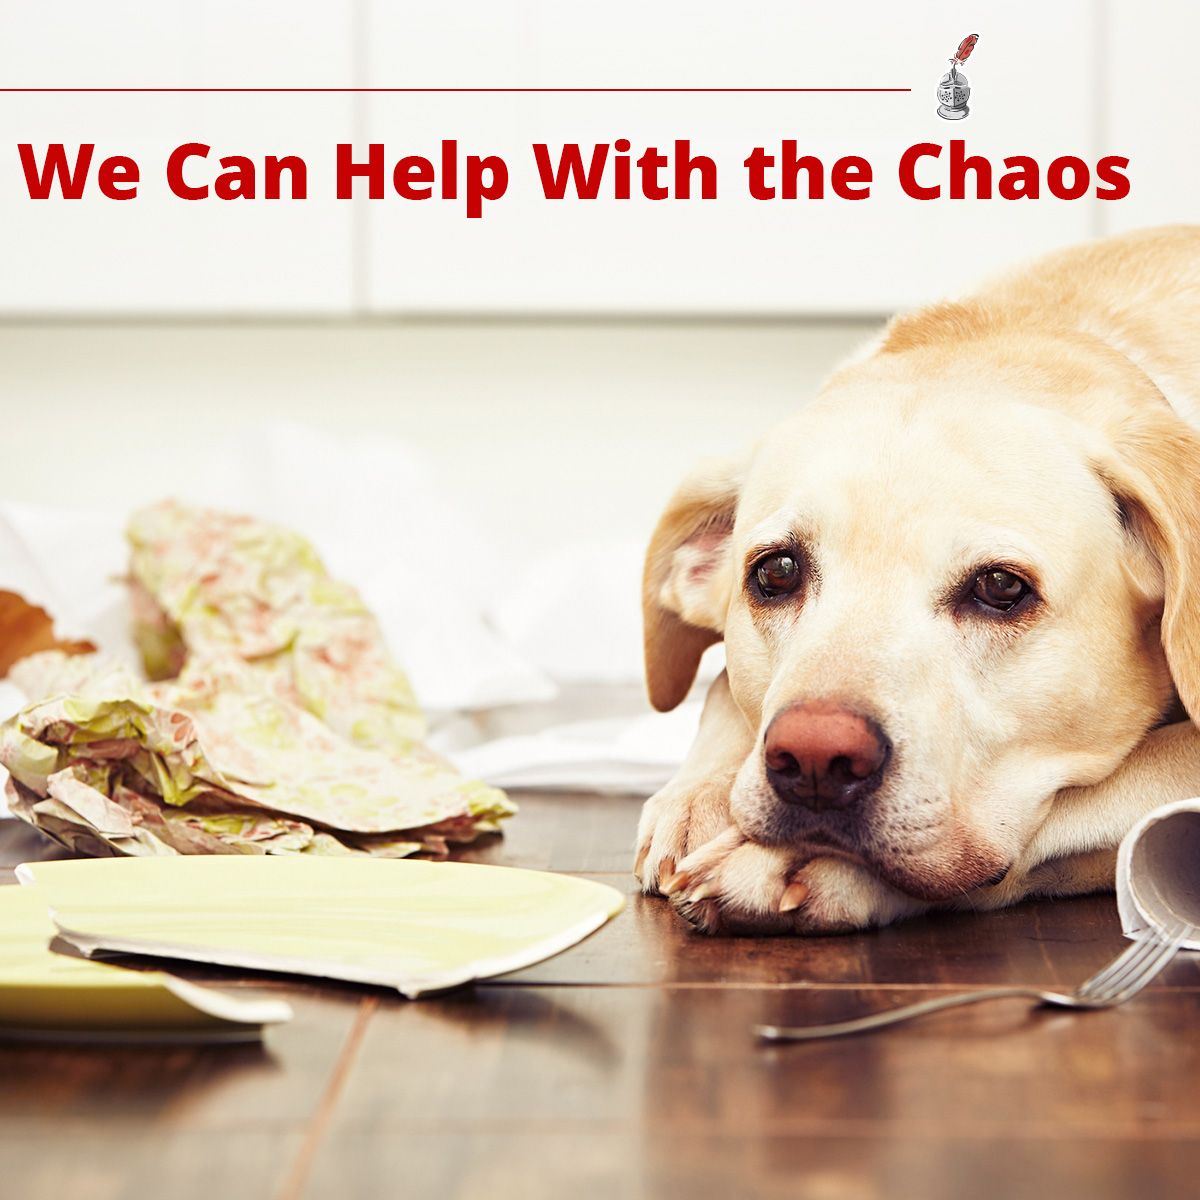 We Can Help With the Chaos